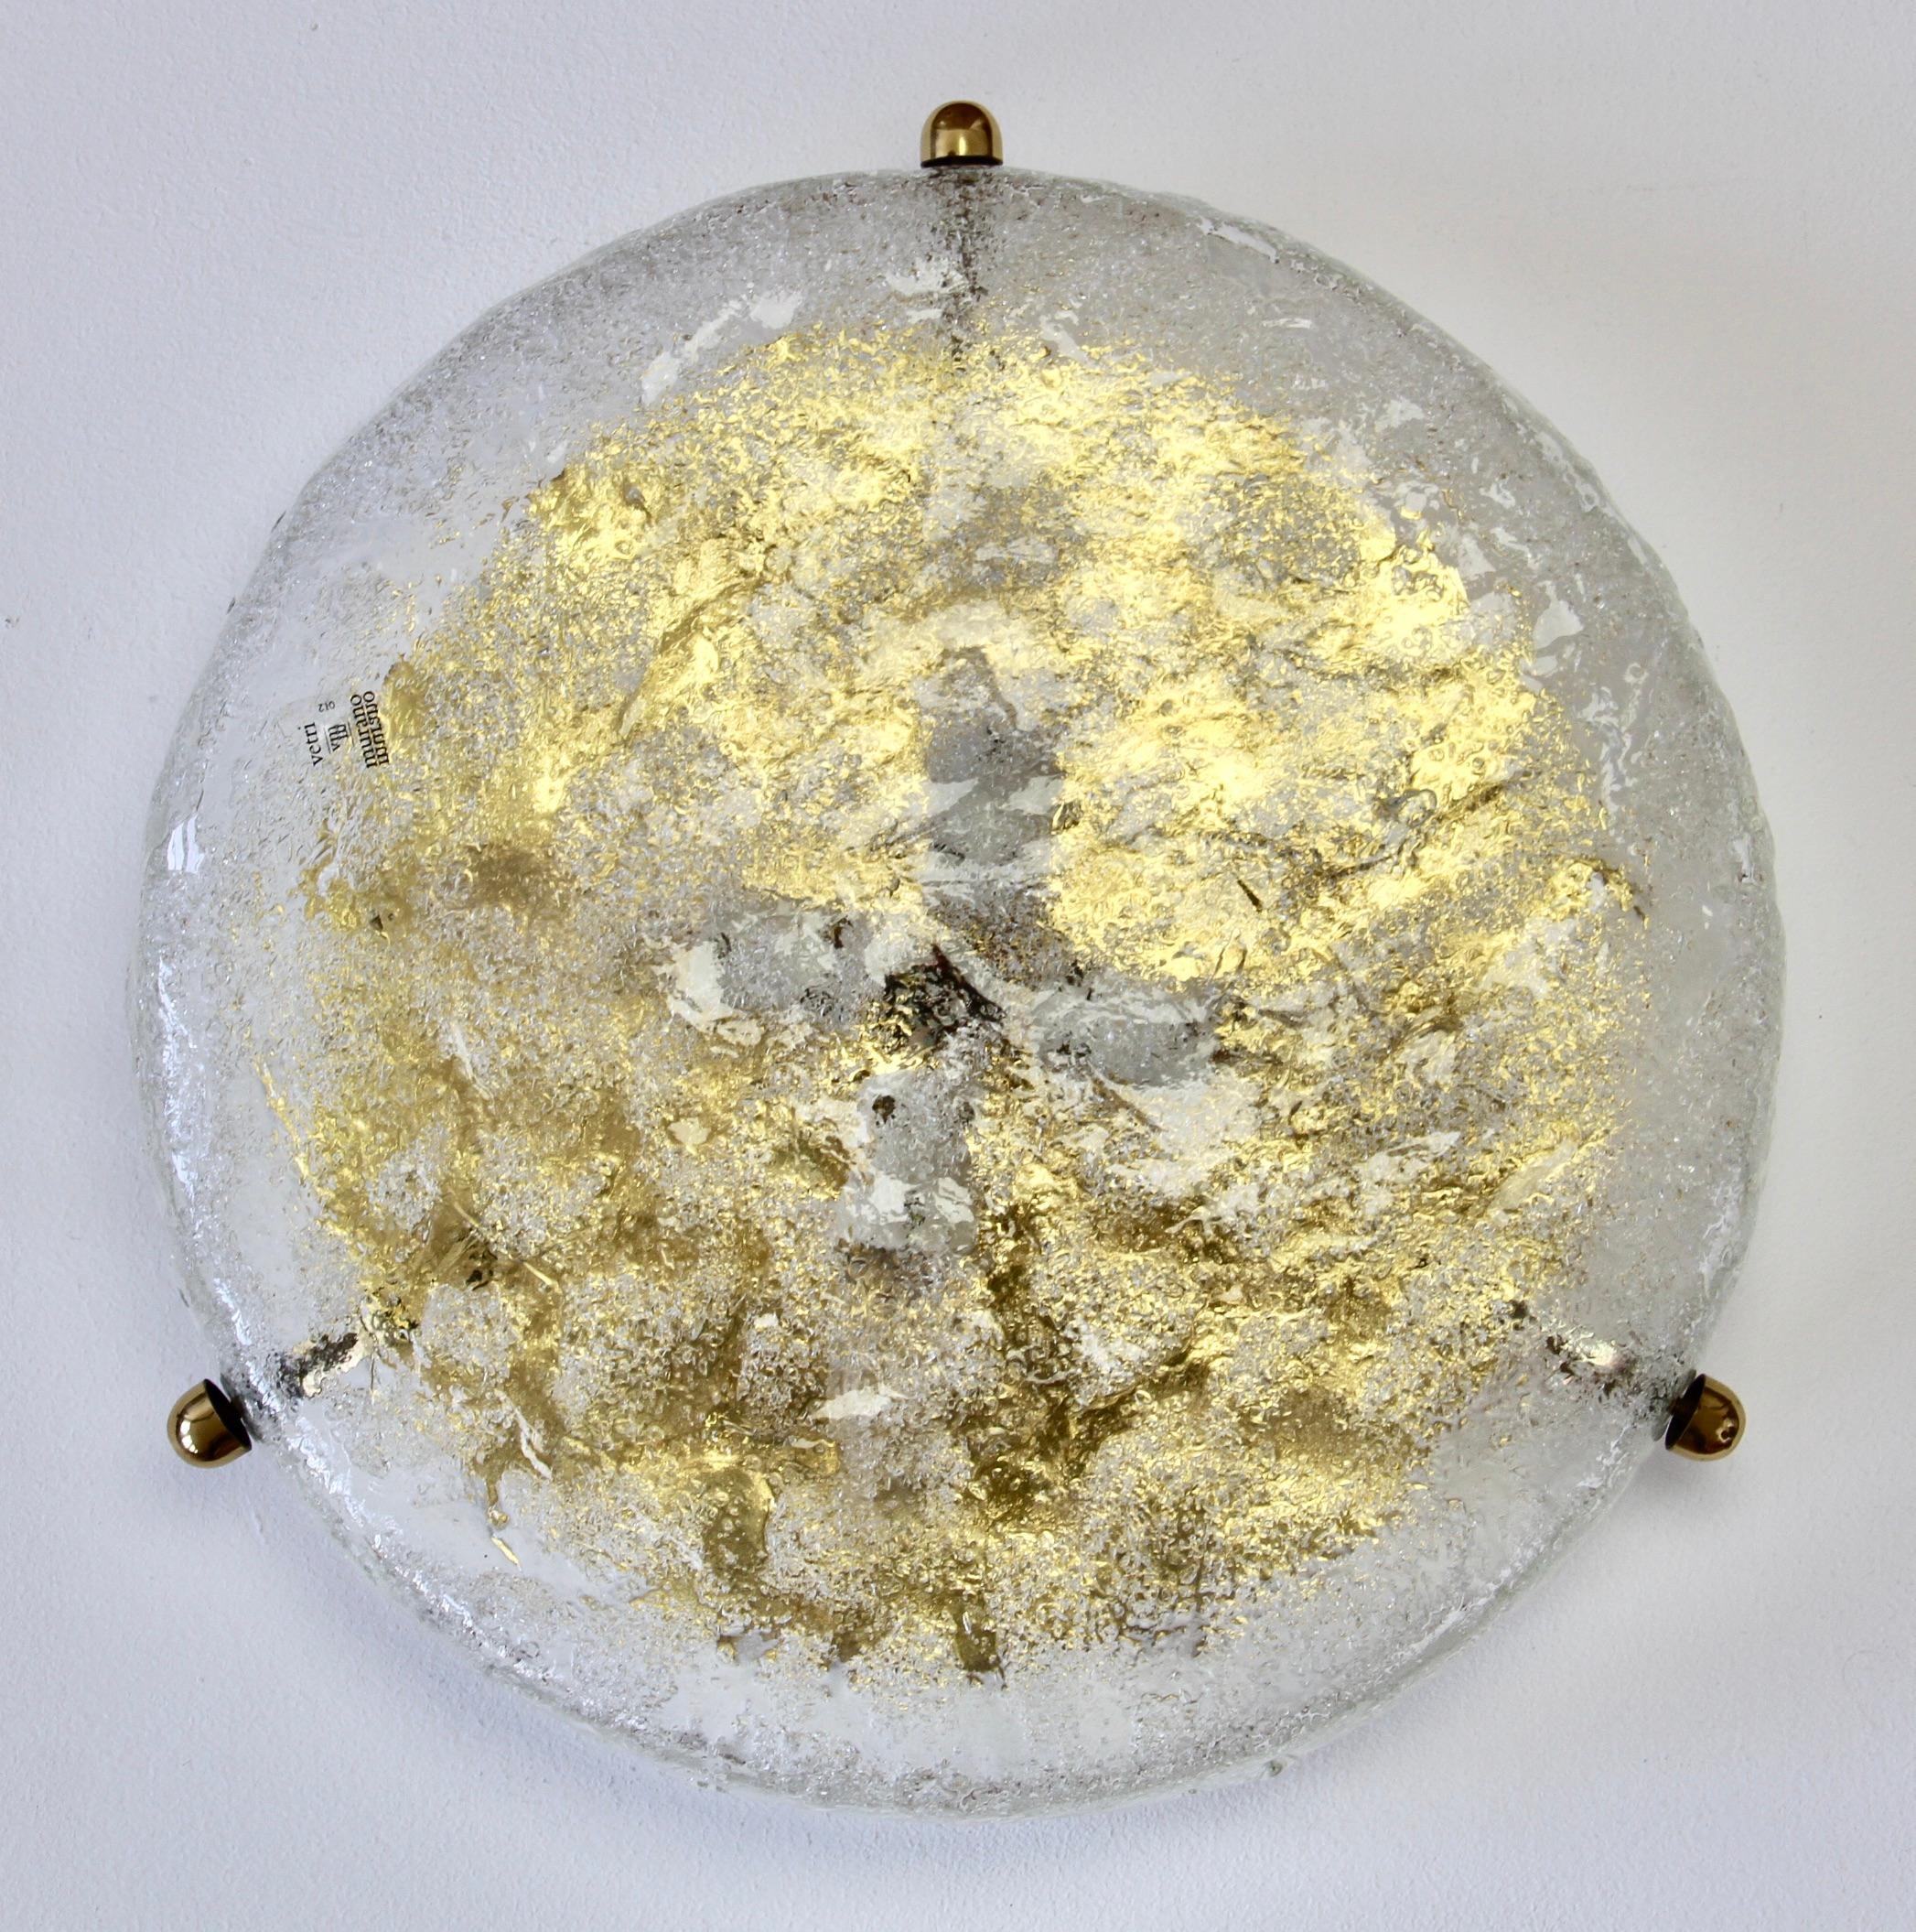 Stunning Mid-Century Modern textured ice glass flushmount light fixture by German manufacturer Hillebrand, circa 1965.This vintage ceiling lamp, often mistakenly attributed to Kalmar, features a huge round glass dish is made of Italian 'Frit' Murano